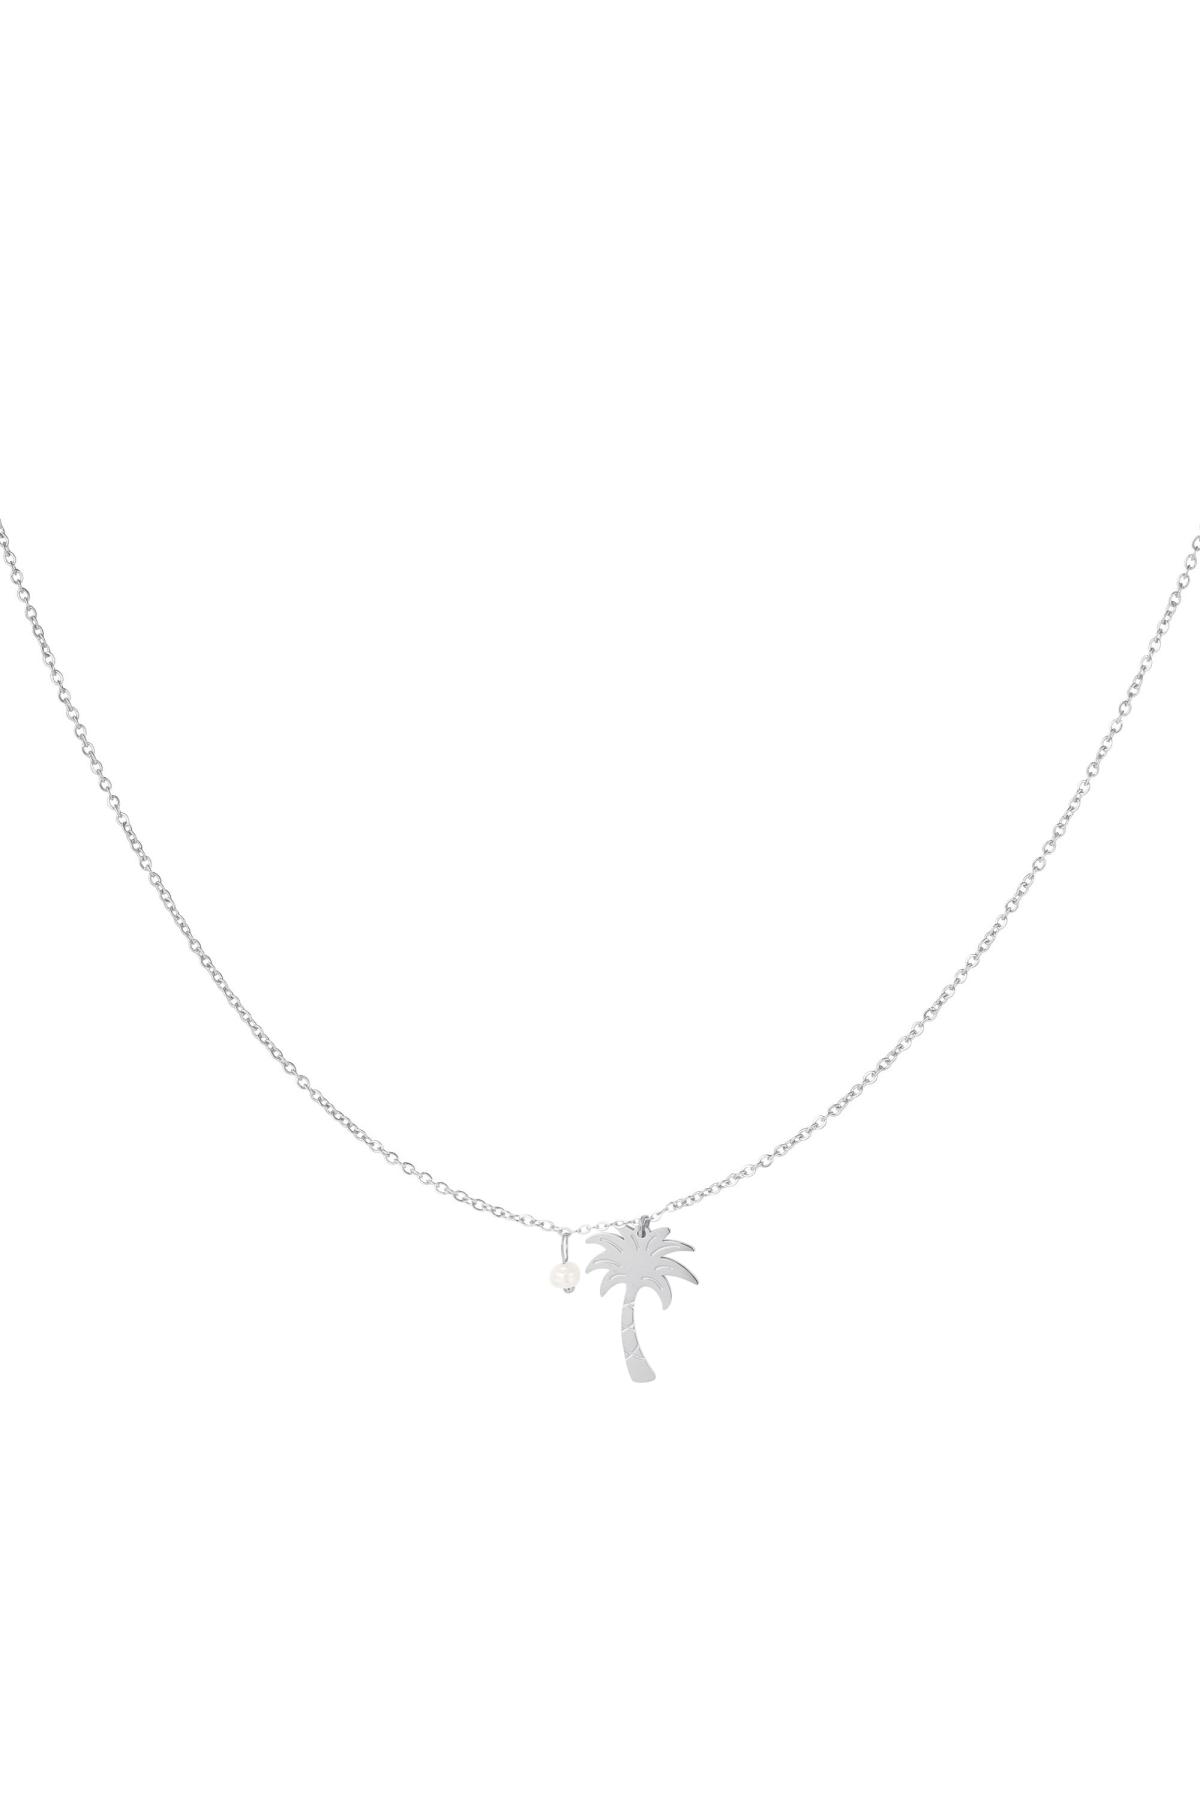 Necklace palm tree - Beach collection Silver Stainless Steel